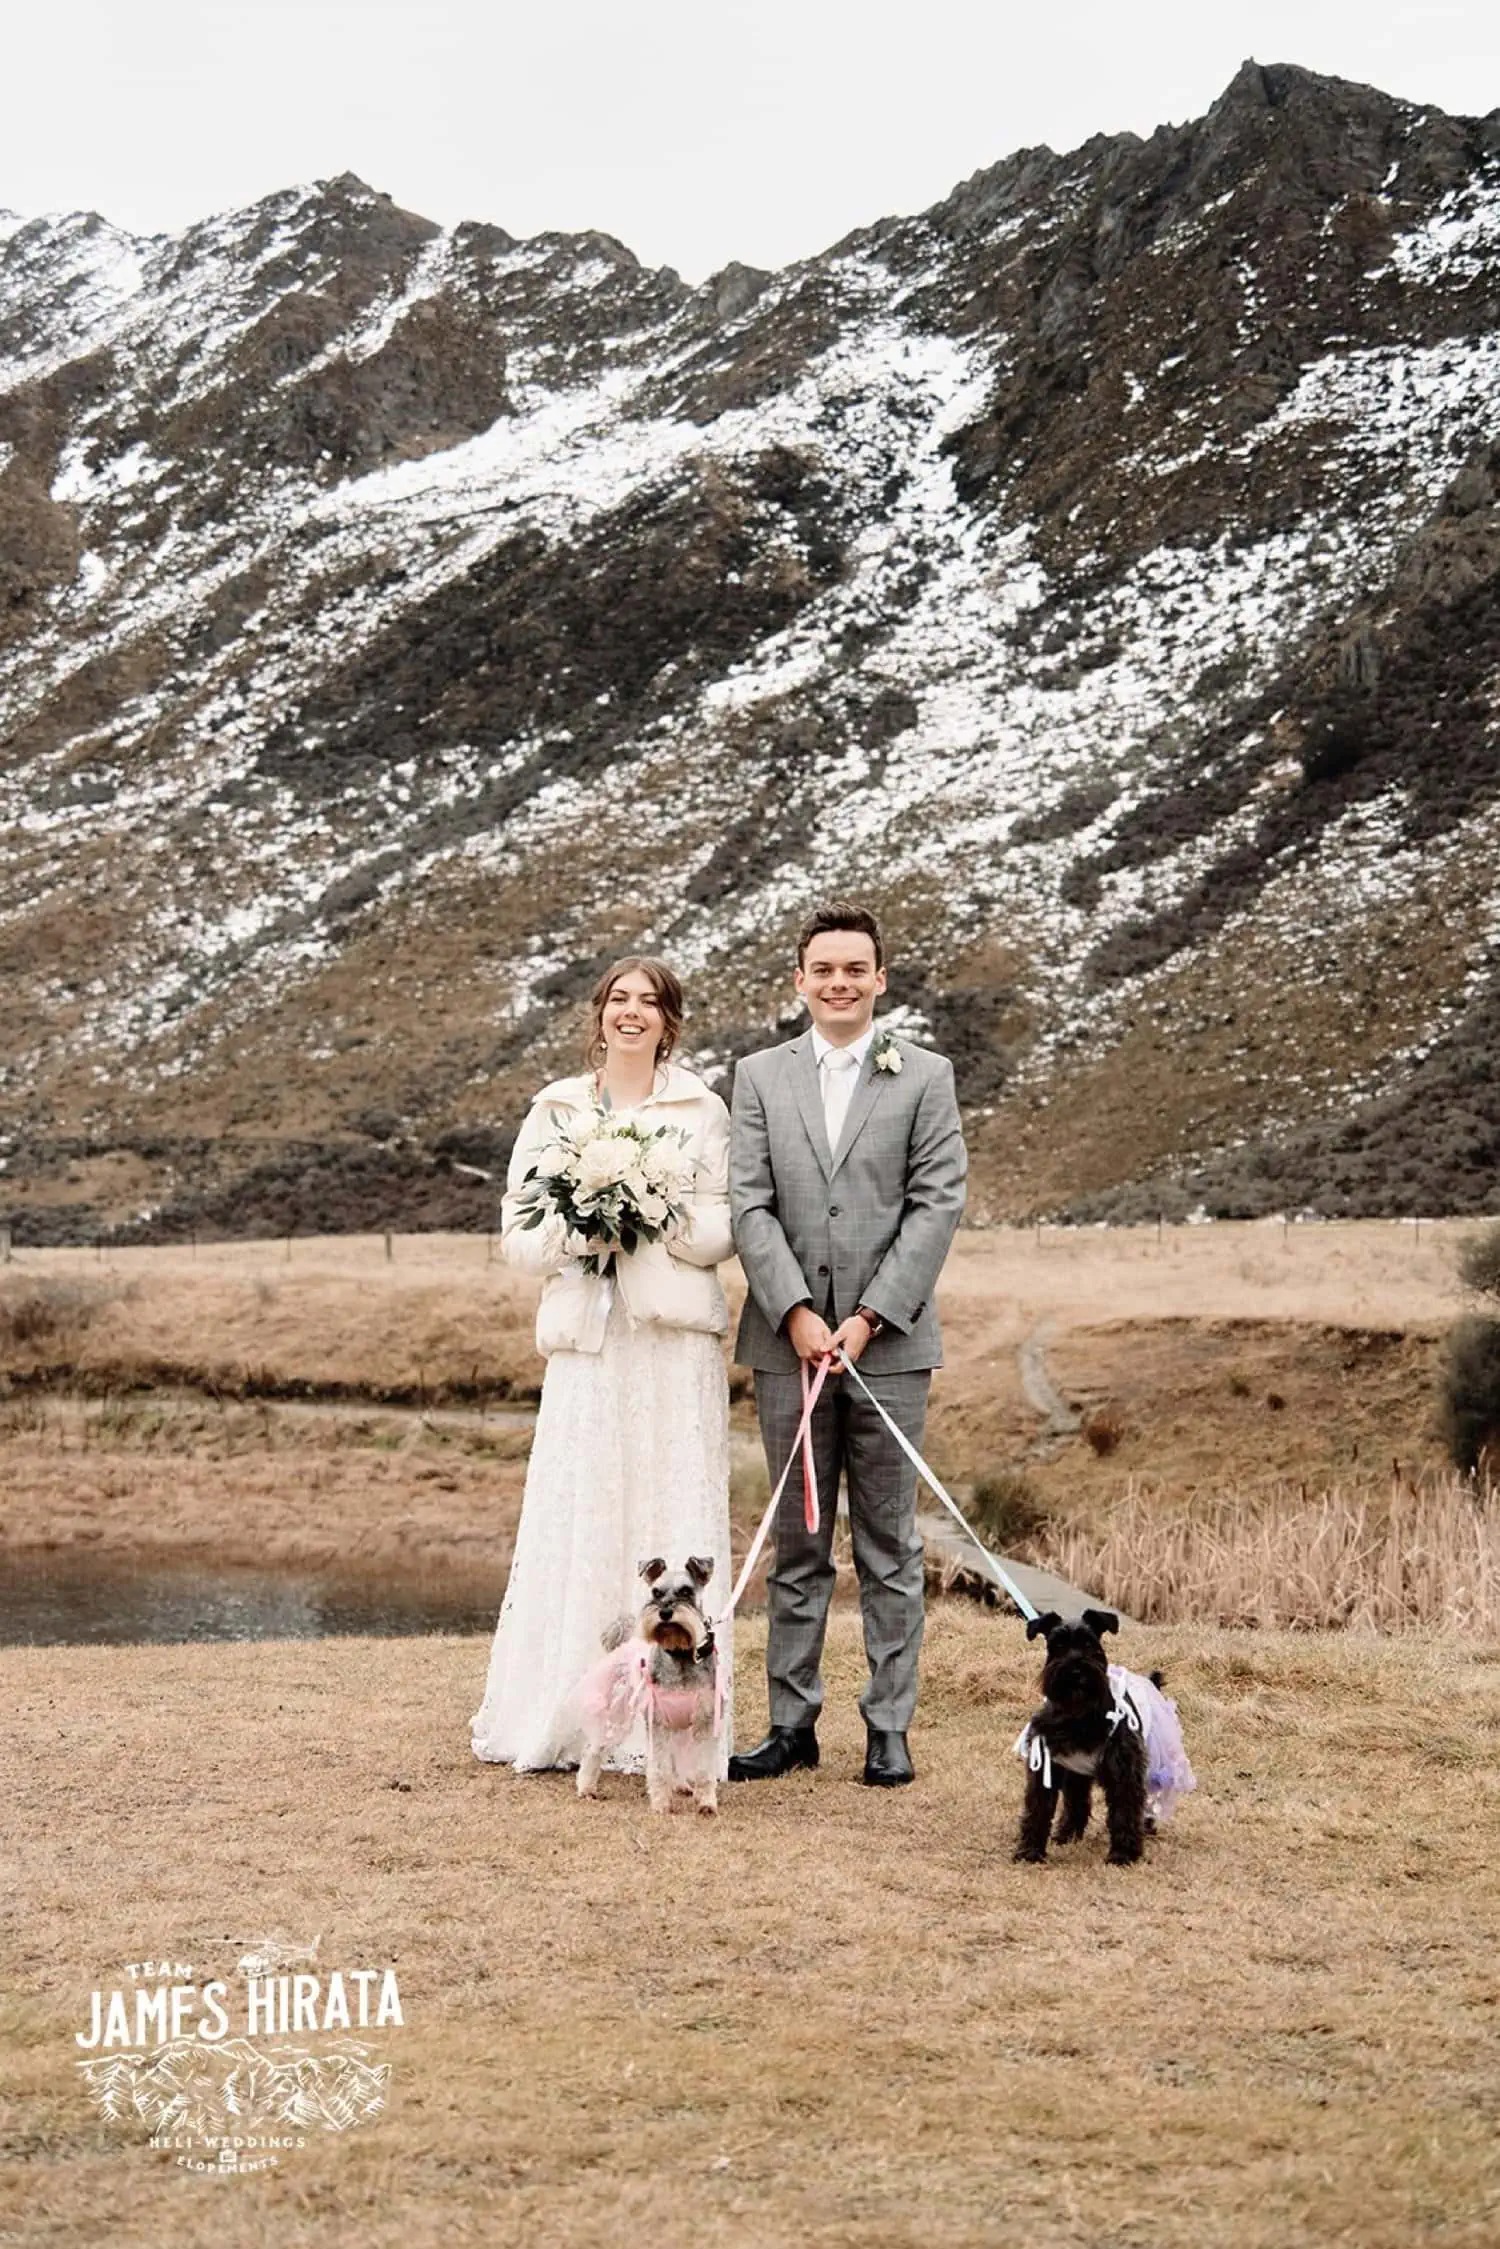 Regan & Jake's Queenstown elopement wedding featuring their dogs and a mountain backdrop.